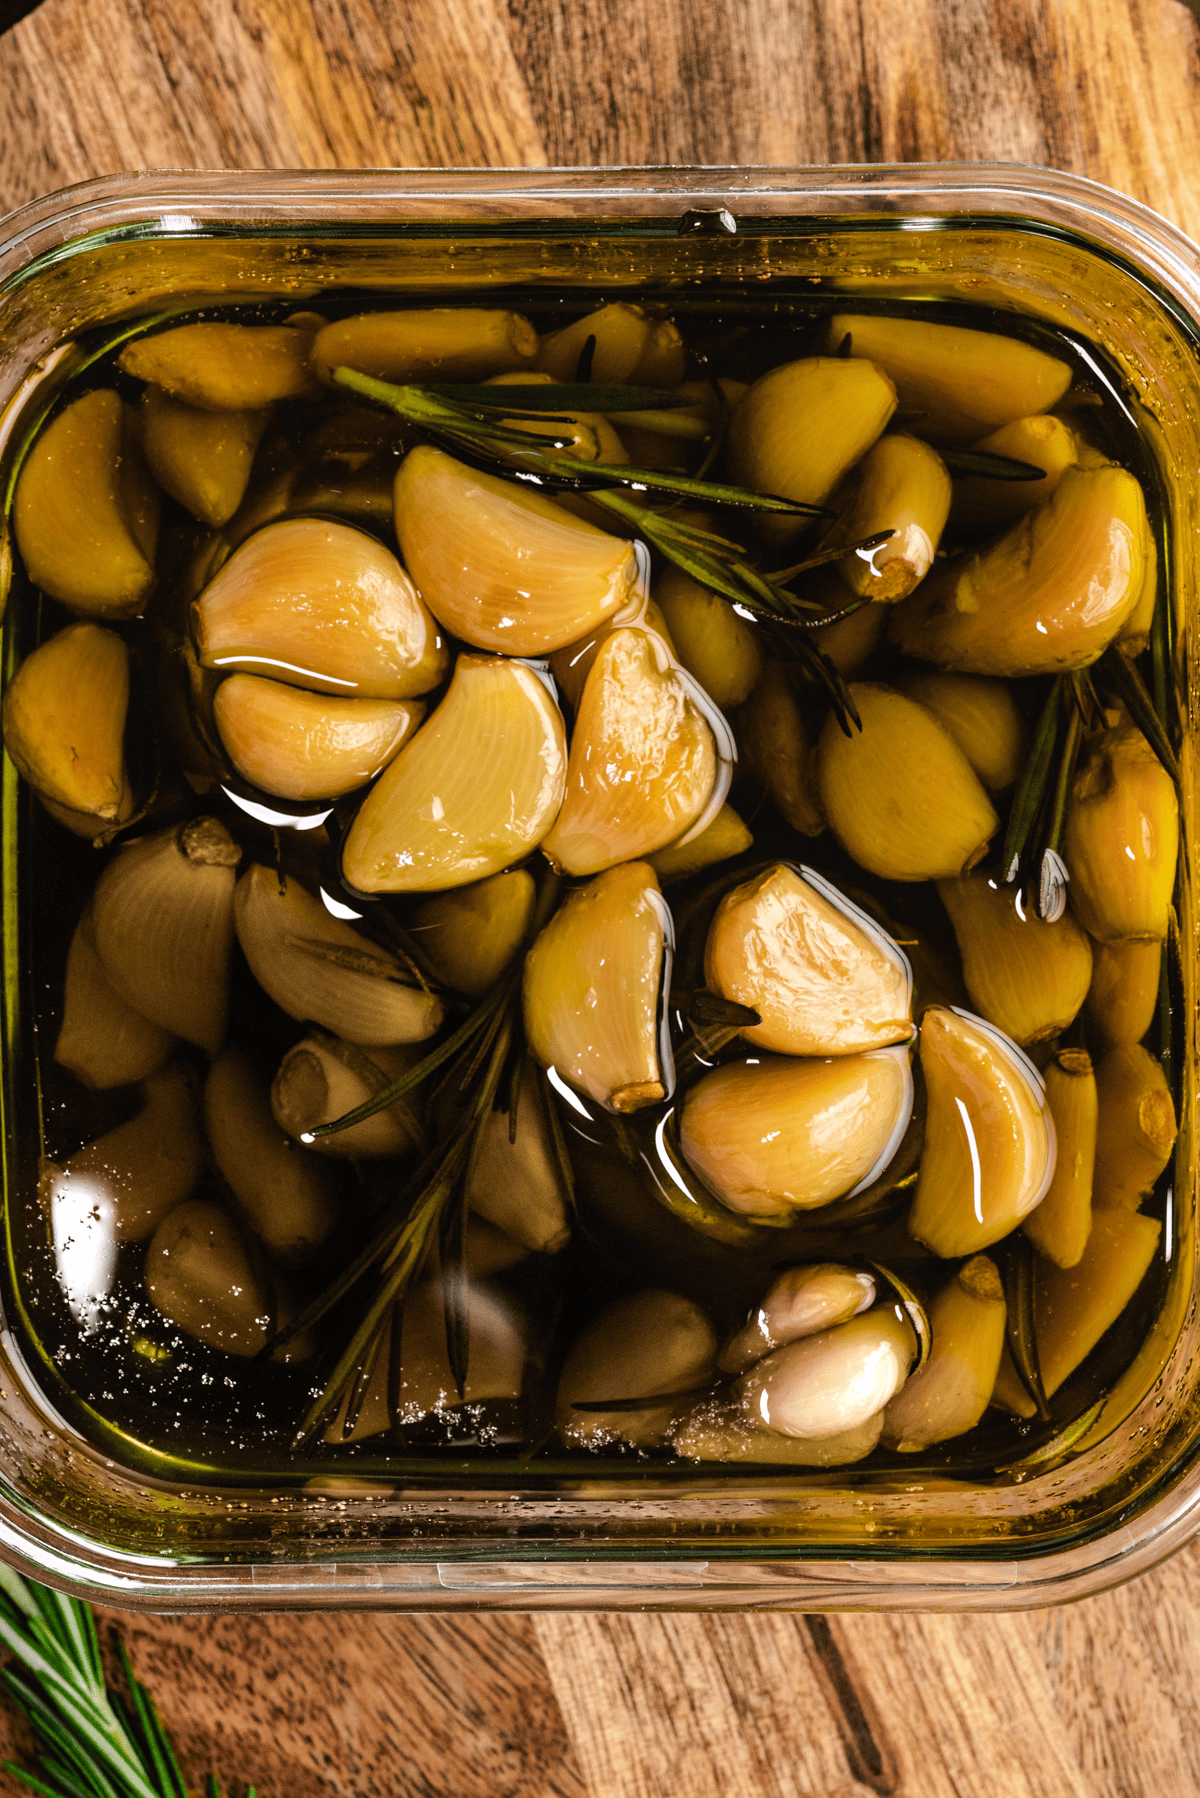 Garlic lovers rejoice: You can make homemade garlic confit and garlic oil with only a few minutes of prep time. Slowly roasting garlic cloves in olive oil allows them to become mild, caramelized, and tender enough to spread with a butter knife.